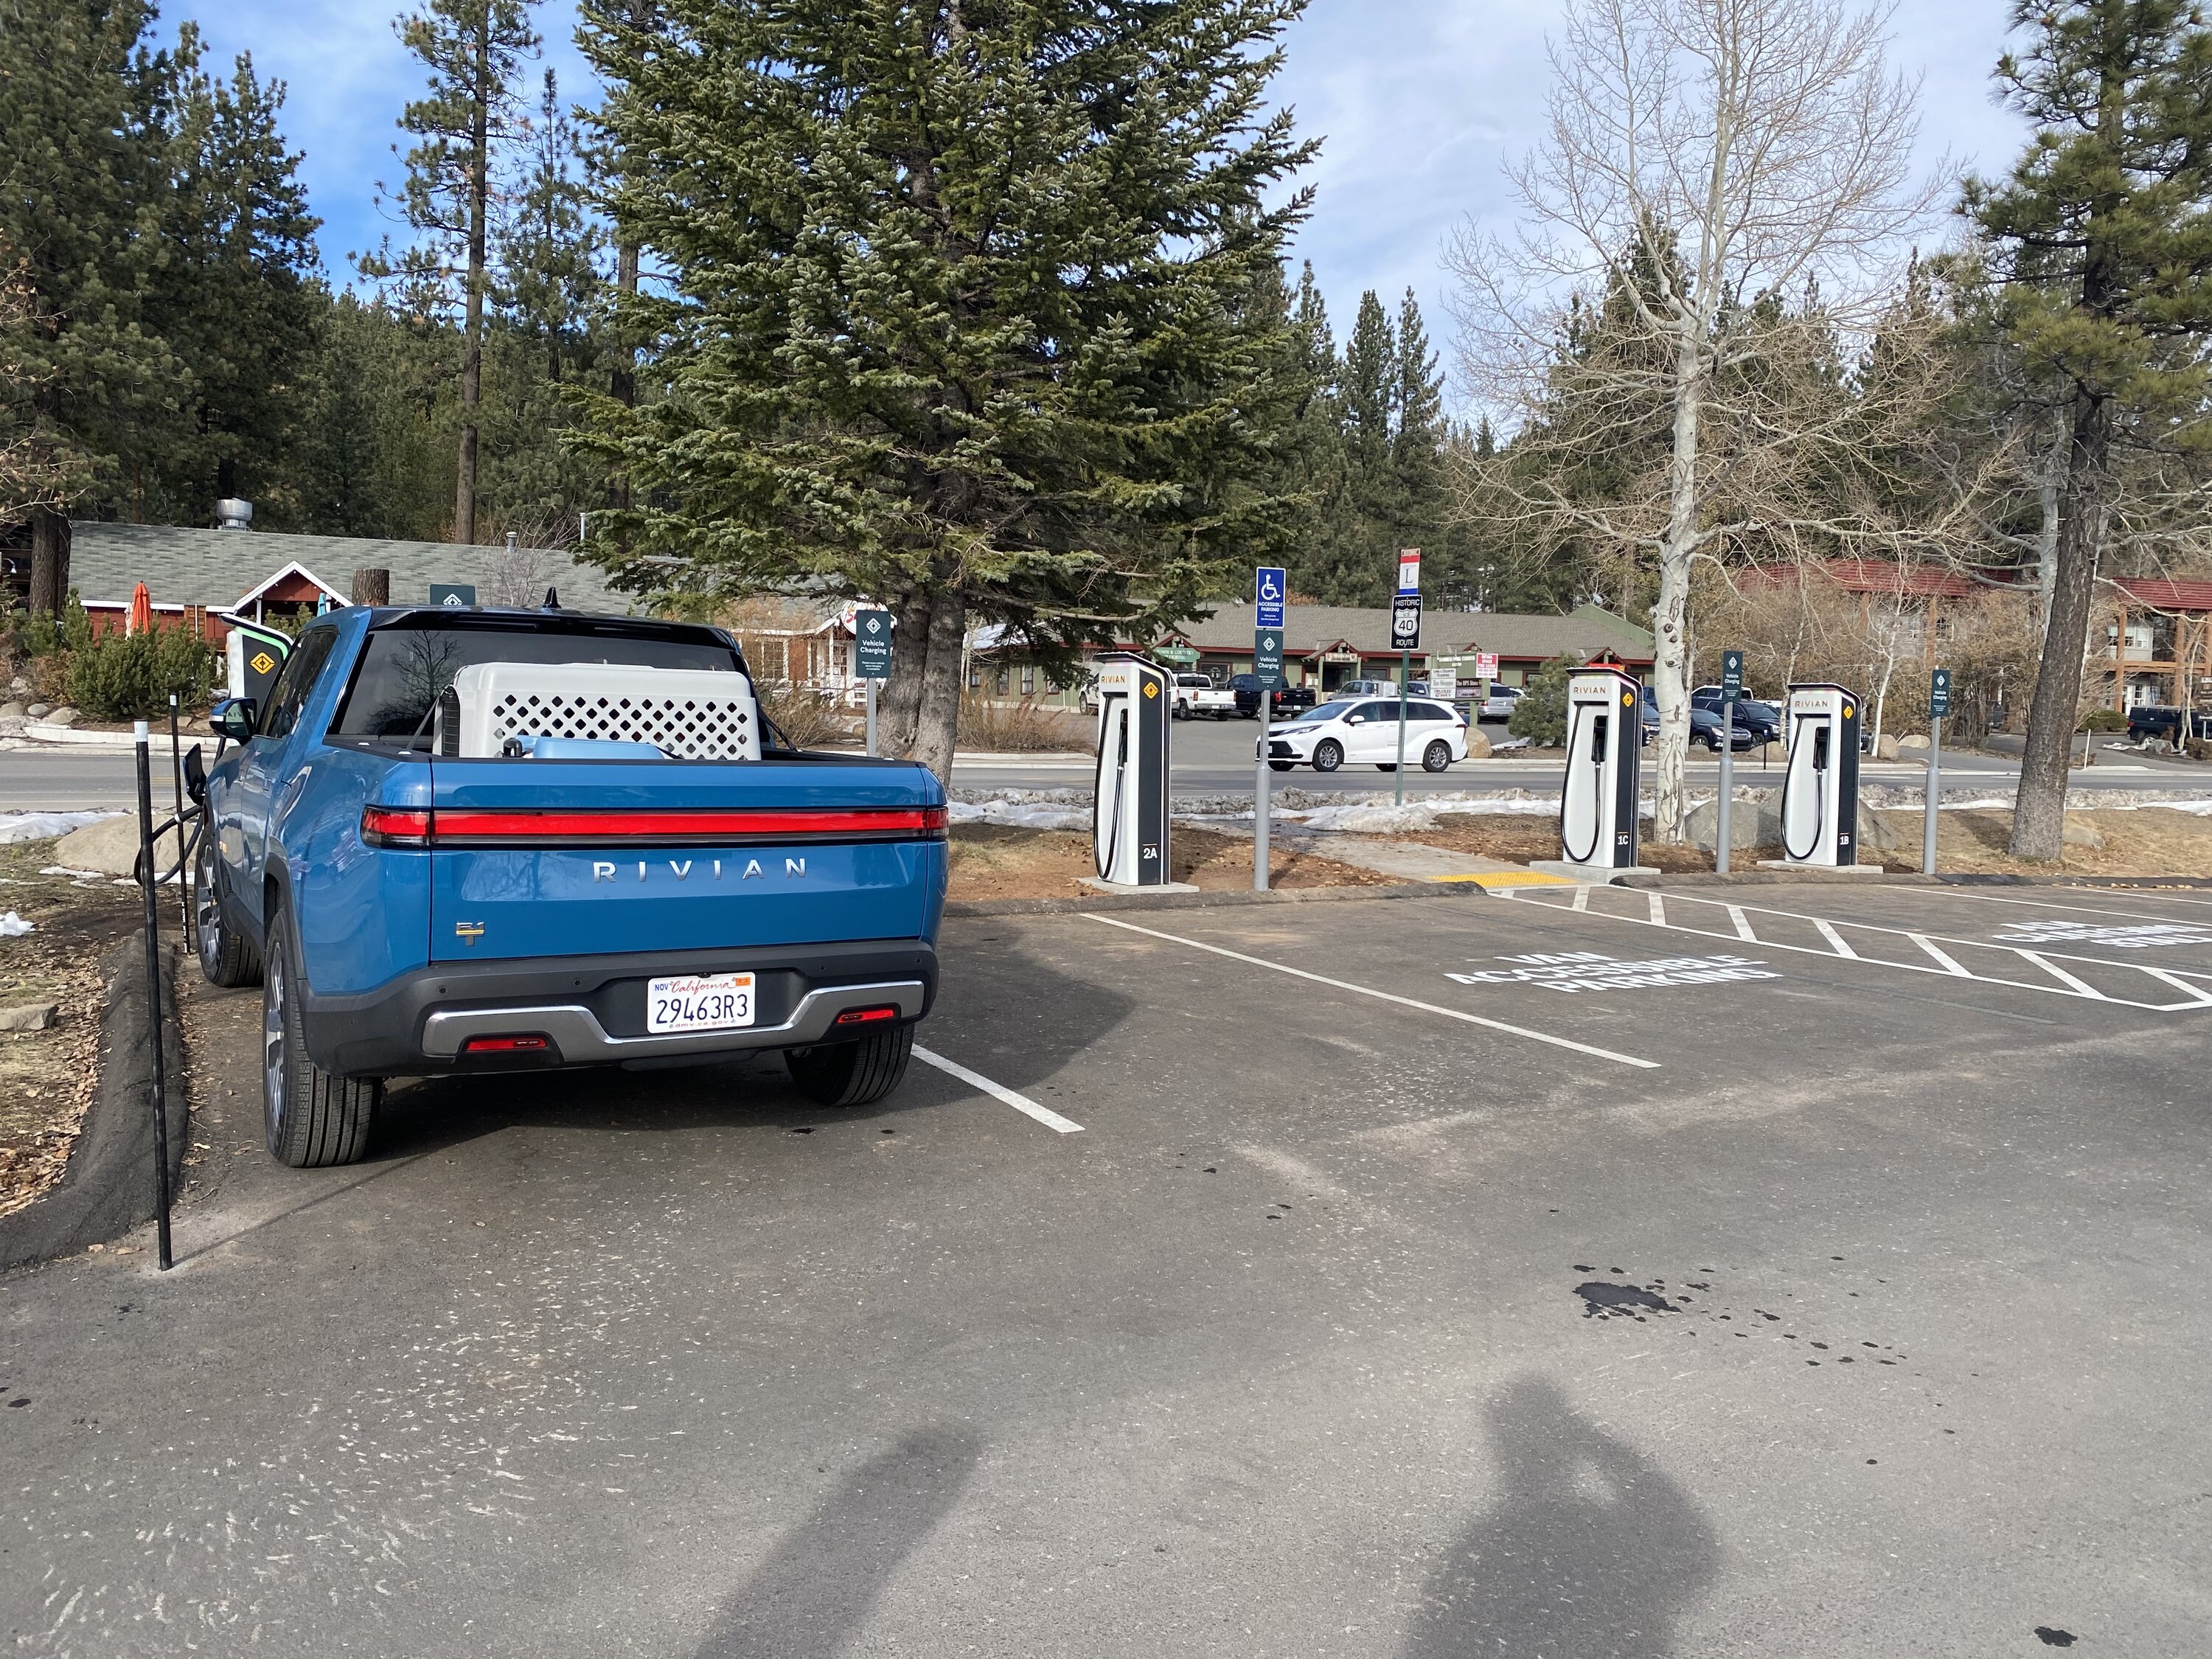 Rivian R1T R1S Road Trip, RAN use, and efficiency data from HMB -> Incline Village F6EFD2E7-A584-41D0-85BC-A799A7F6D712